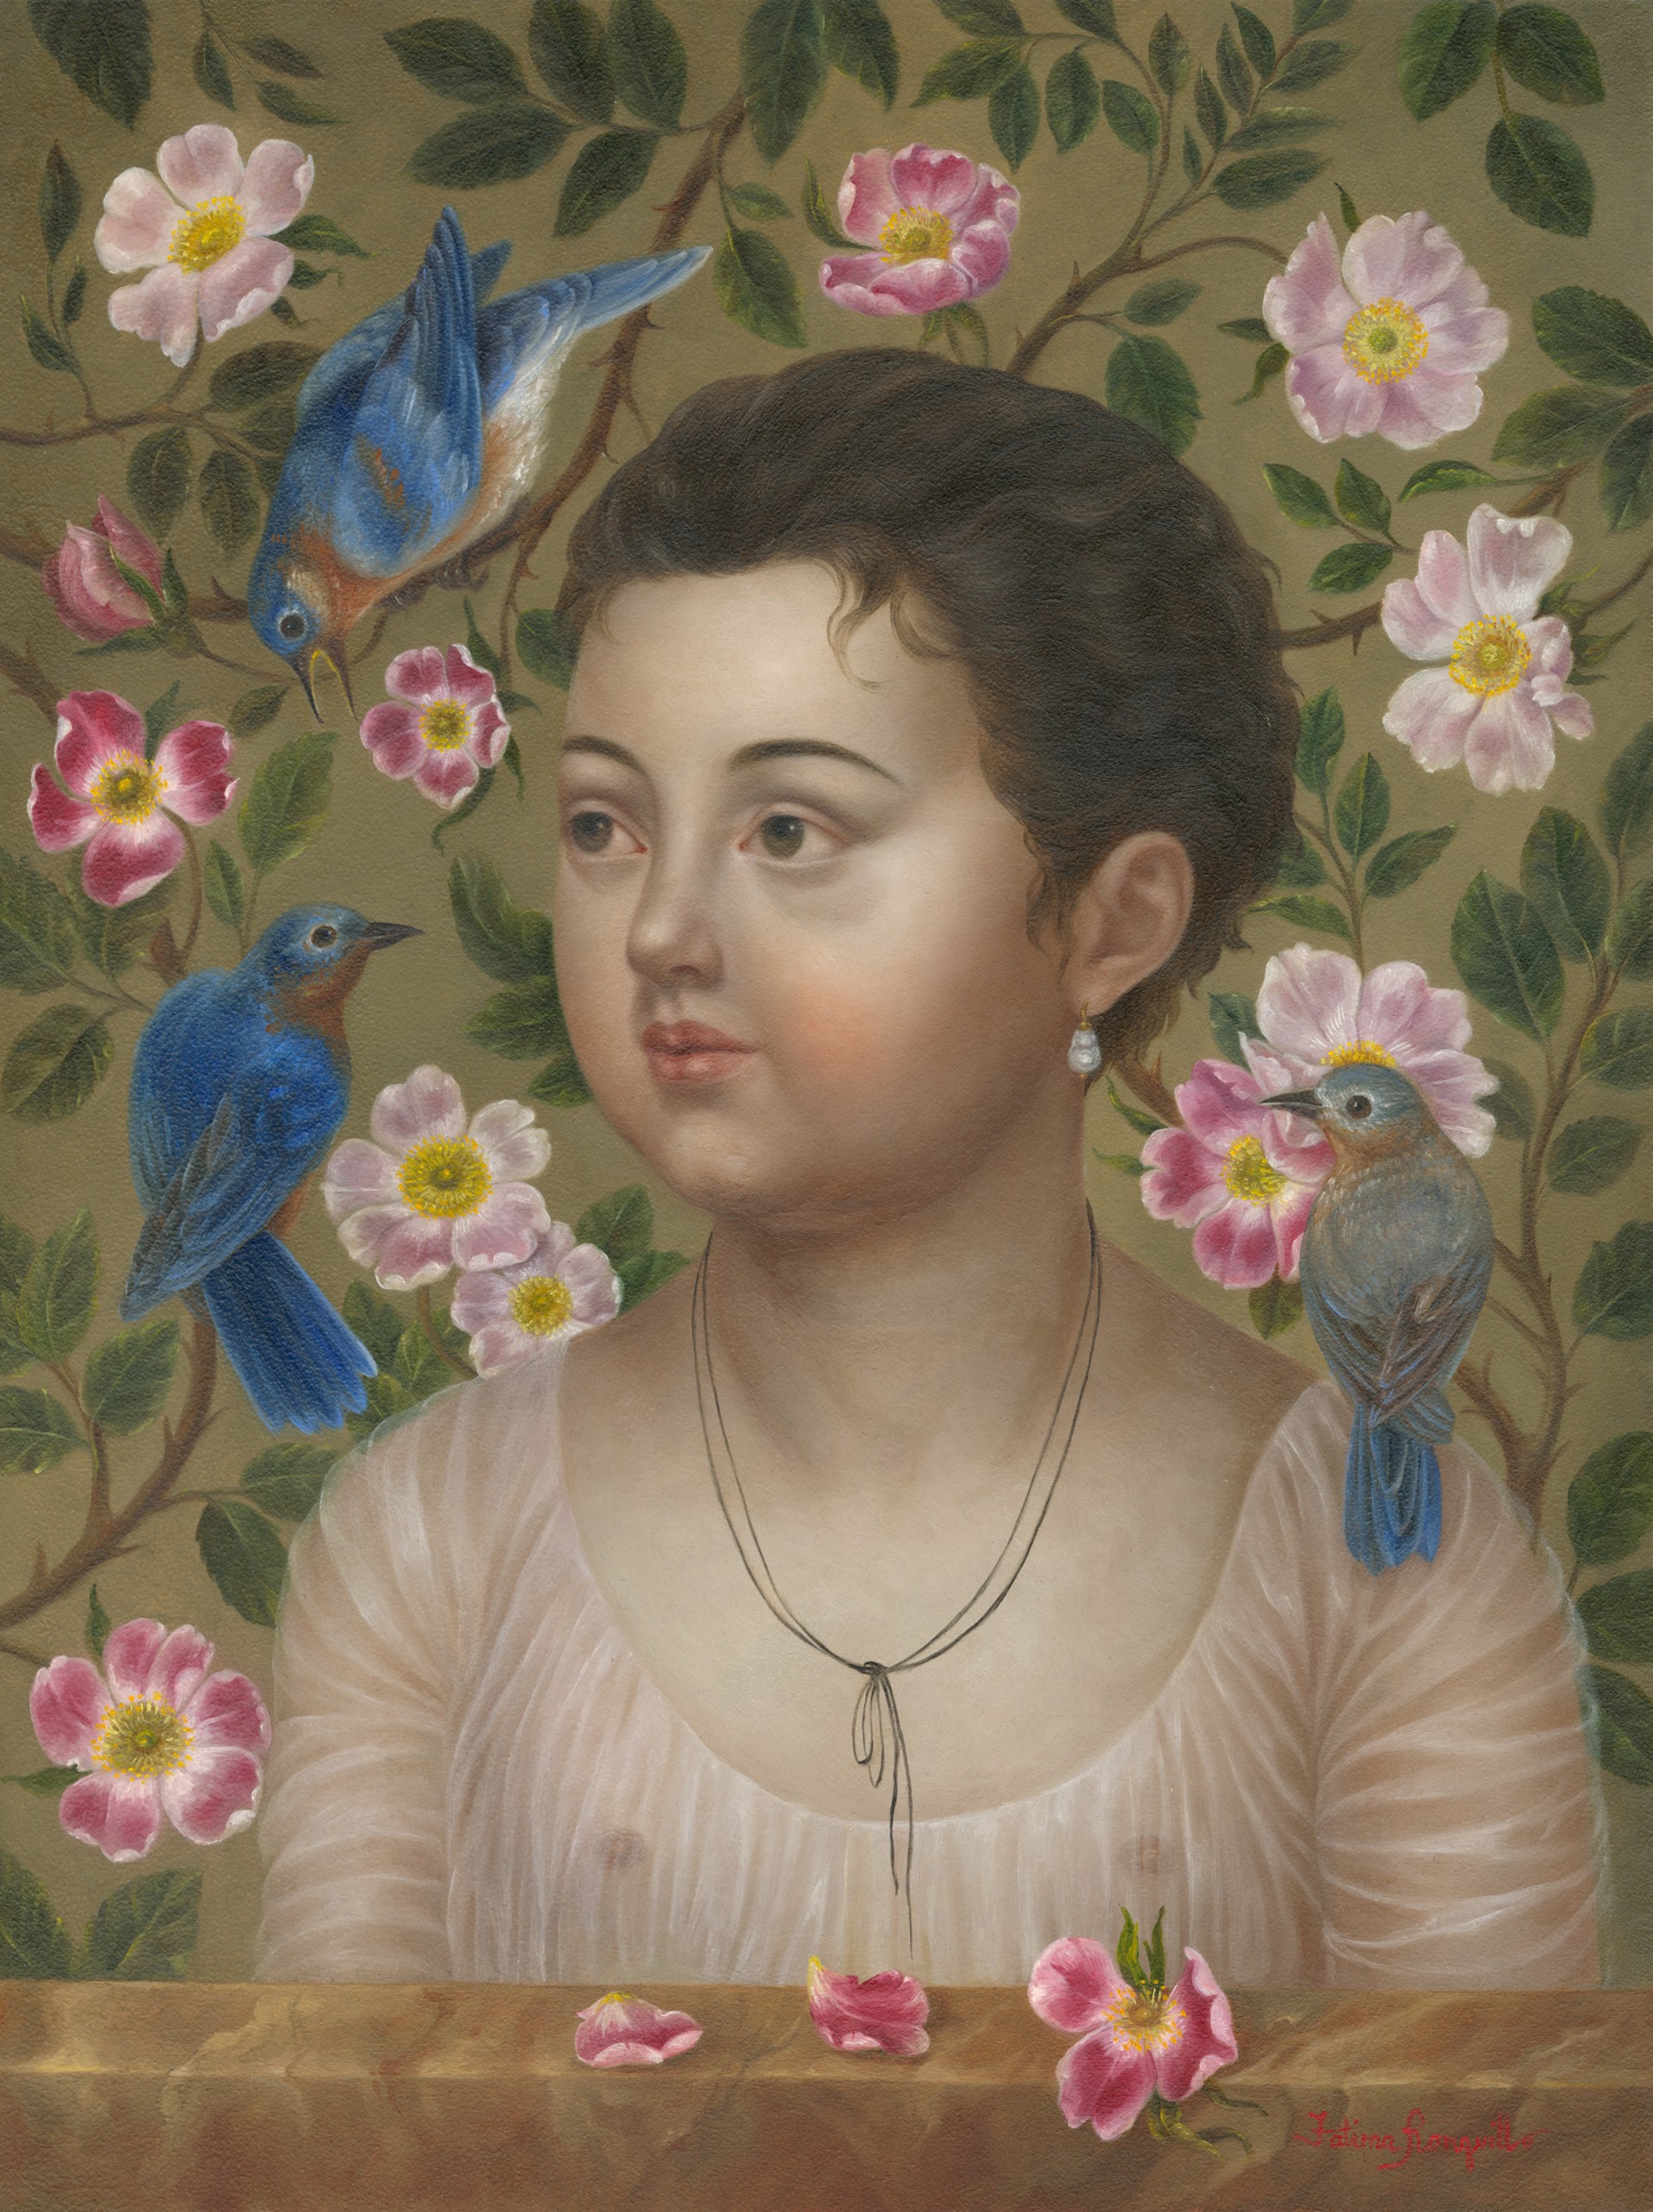 Sweetbriar and Bluebirds by Fatima Ronquillo